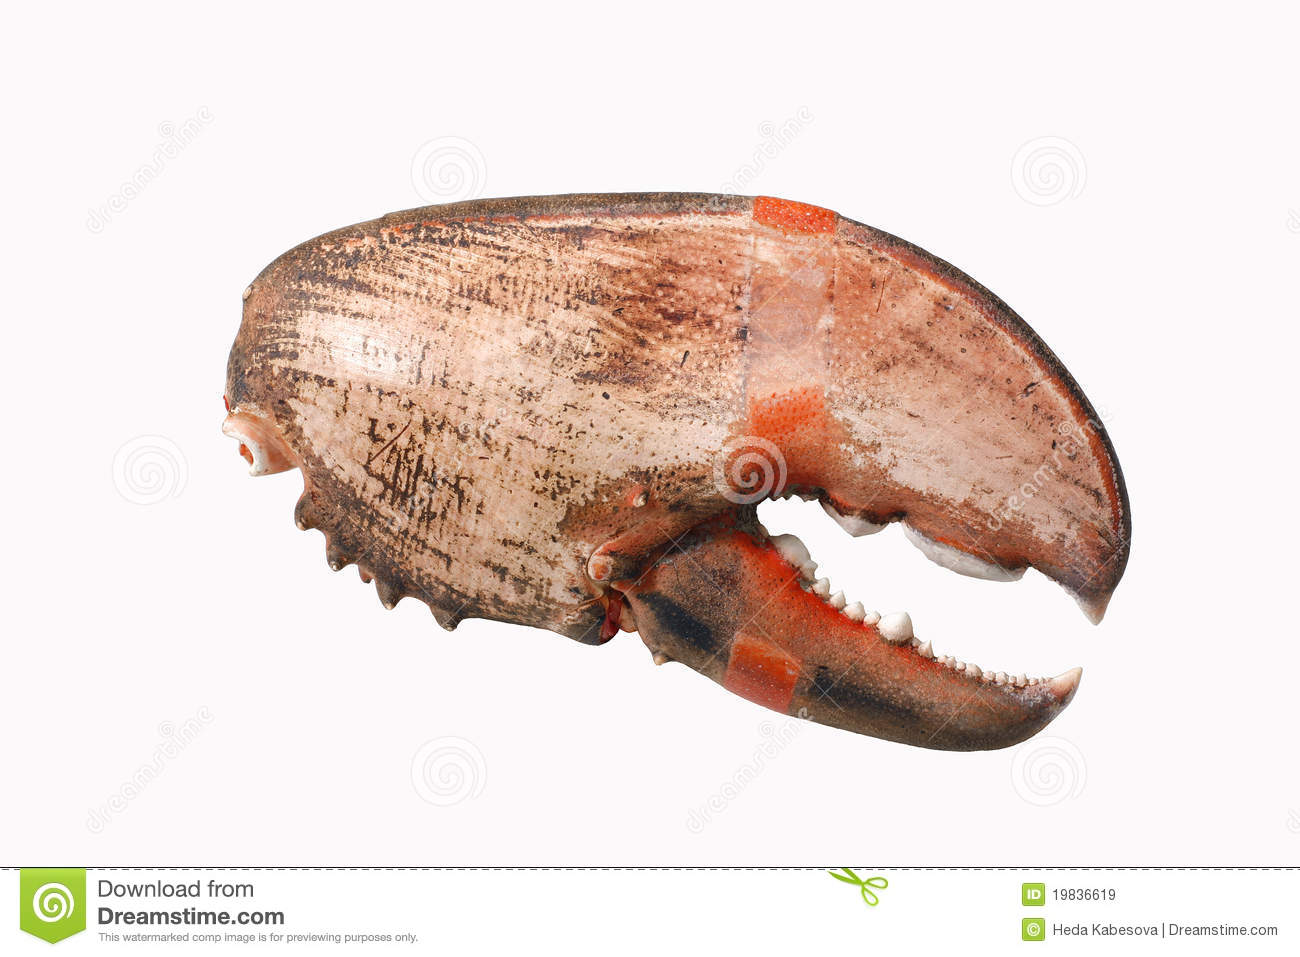 Crab S Claw Royalty Free Stock Images   Image  19836619